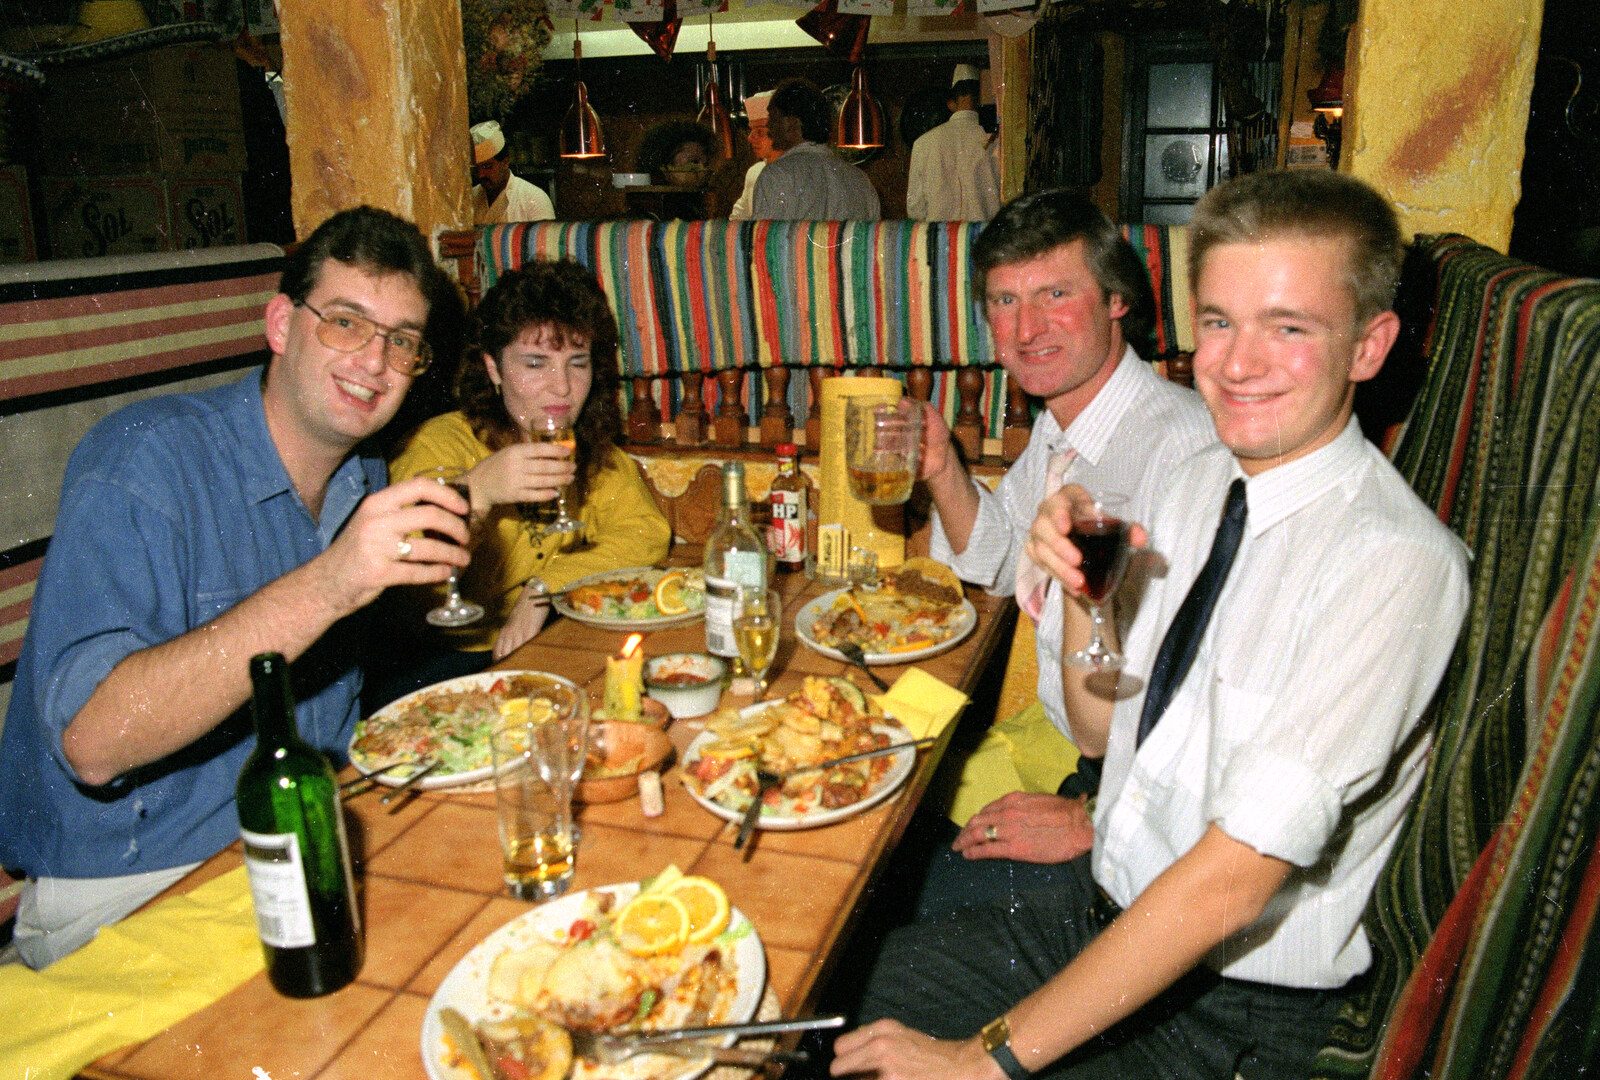 Nosher's in the photo this time from Pedros and Daffodils, Norwich and Billingford, Norfolk - 20th April 1991